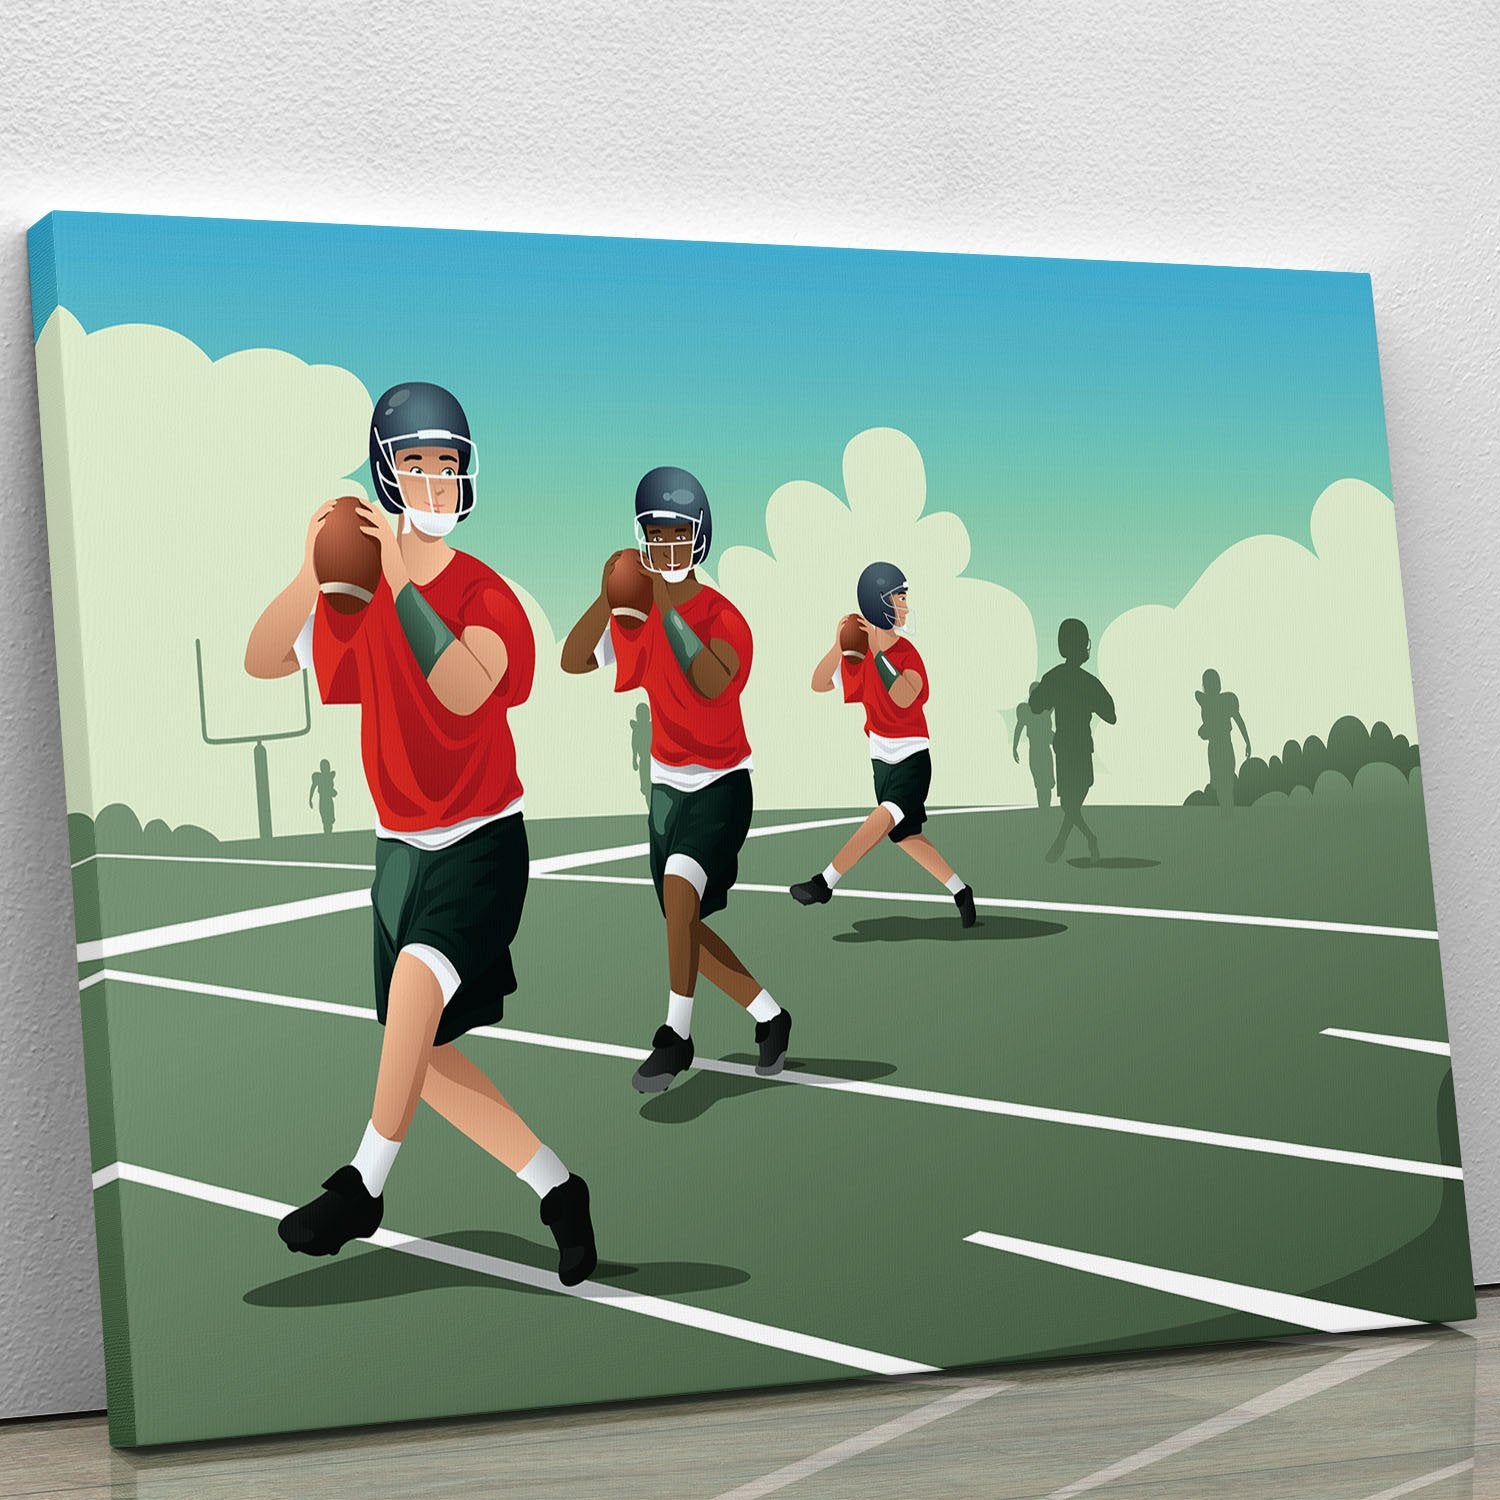 Kids practicing football Canvas Print or Poster